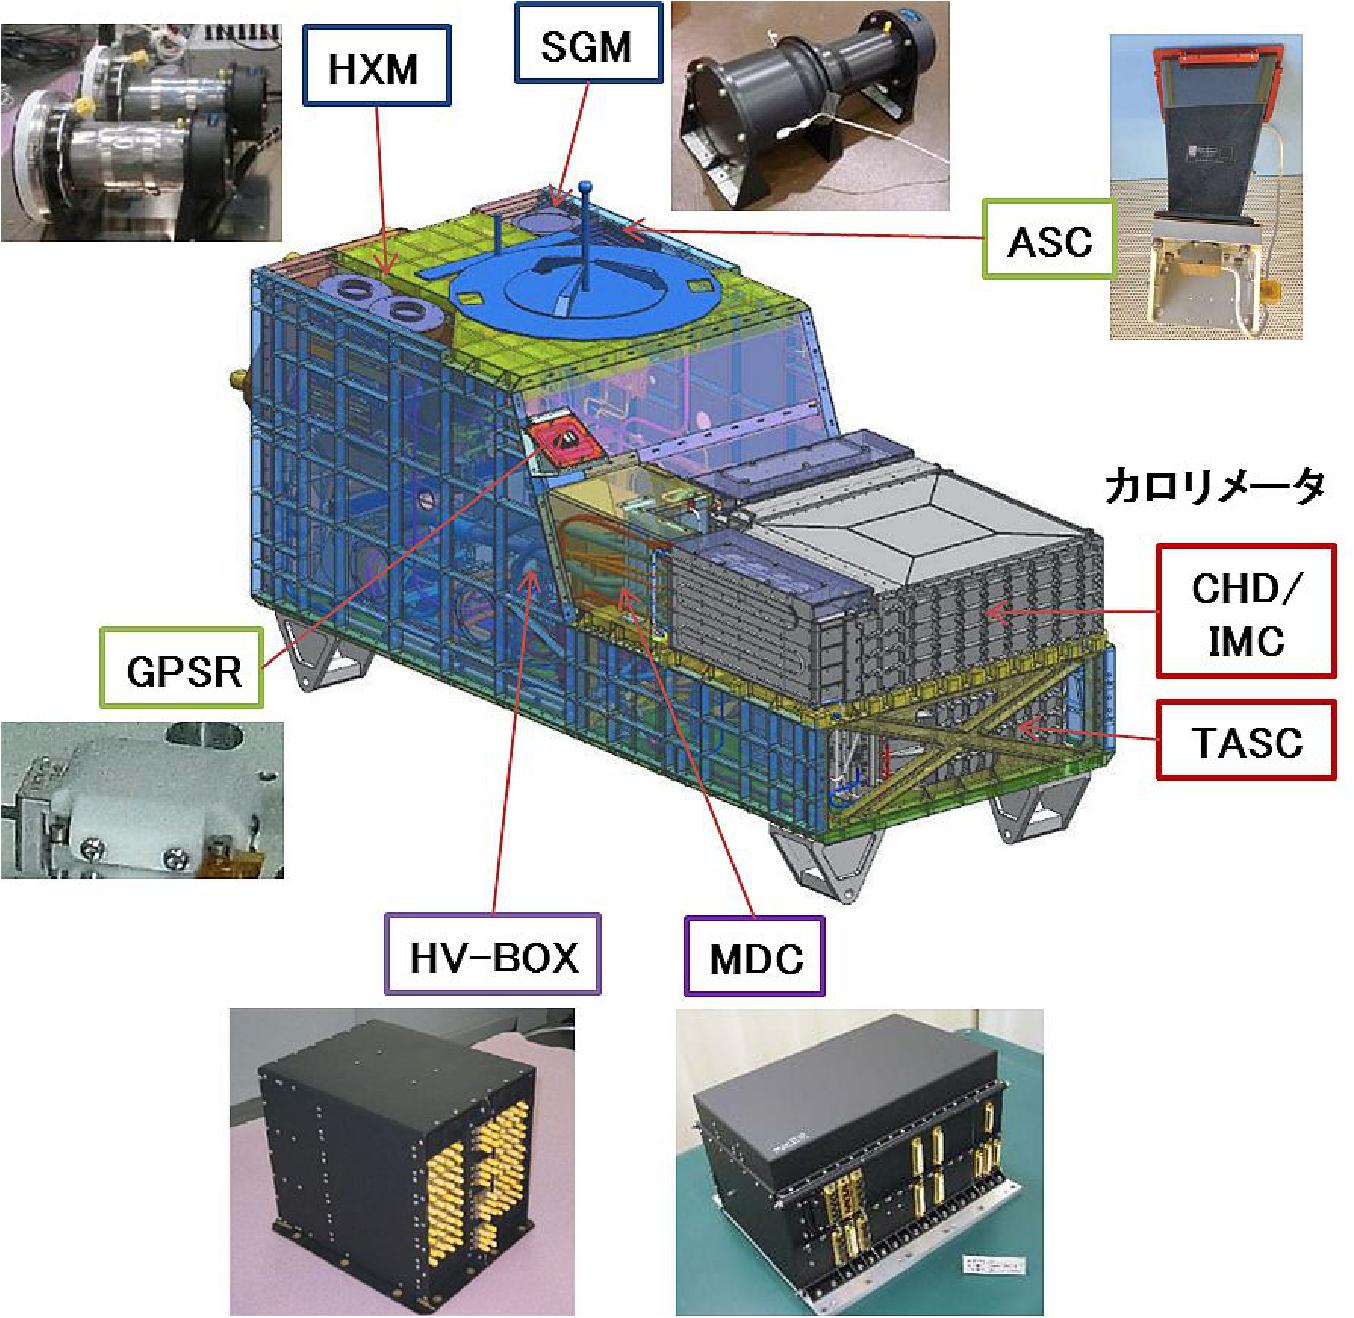 Figure 1: The CALET "pallet" installments for the mission; it consists of the "Main detector" (CAL and GBM) and "Support equipments" (GPSR, ASC etc.), image credit: Waseda University